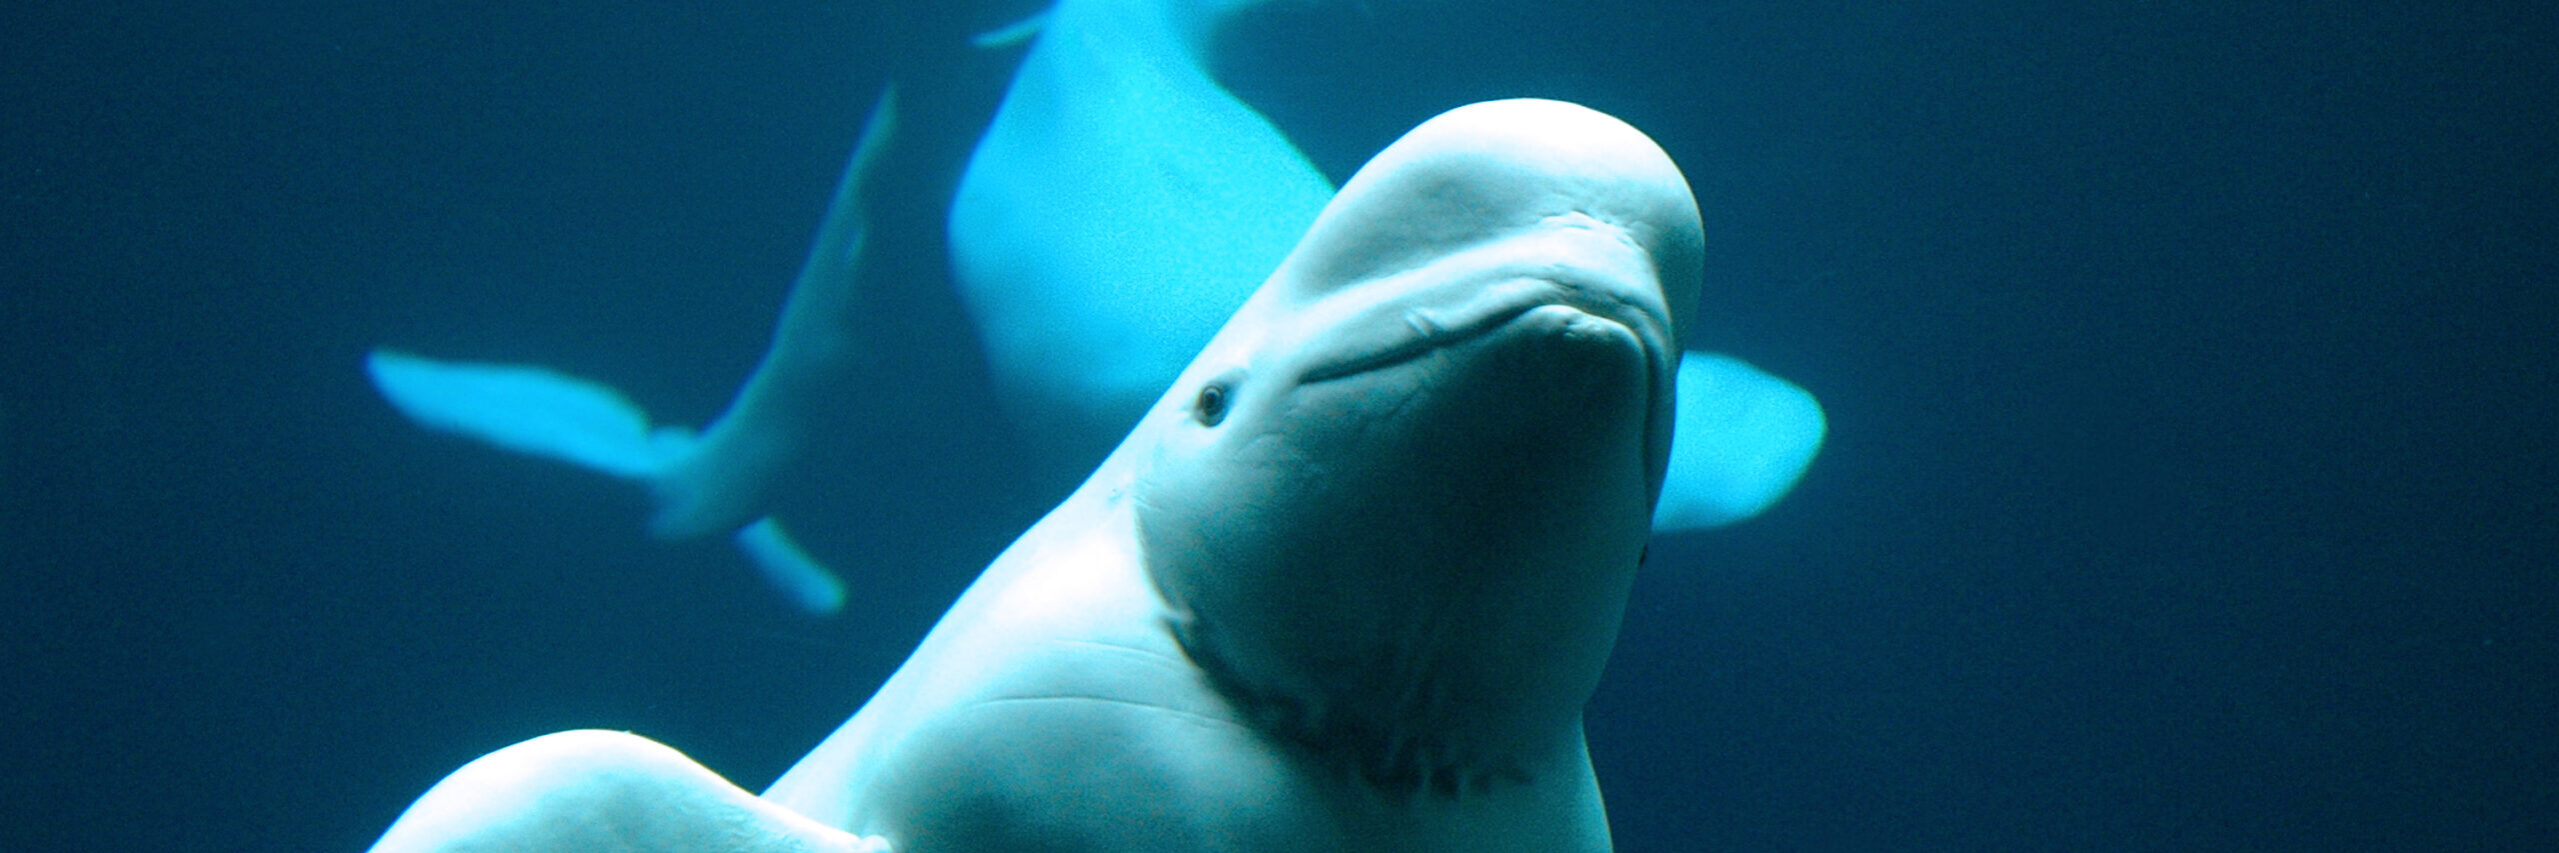 An image of a beluga whale looking curiously at a camera. The whale is underwater. Image source: Mike Johnston, via Flickr.